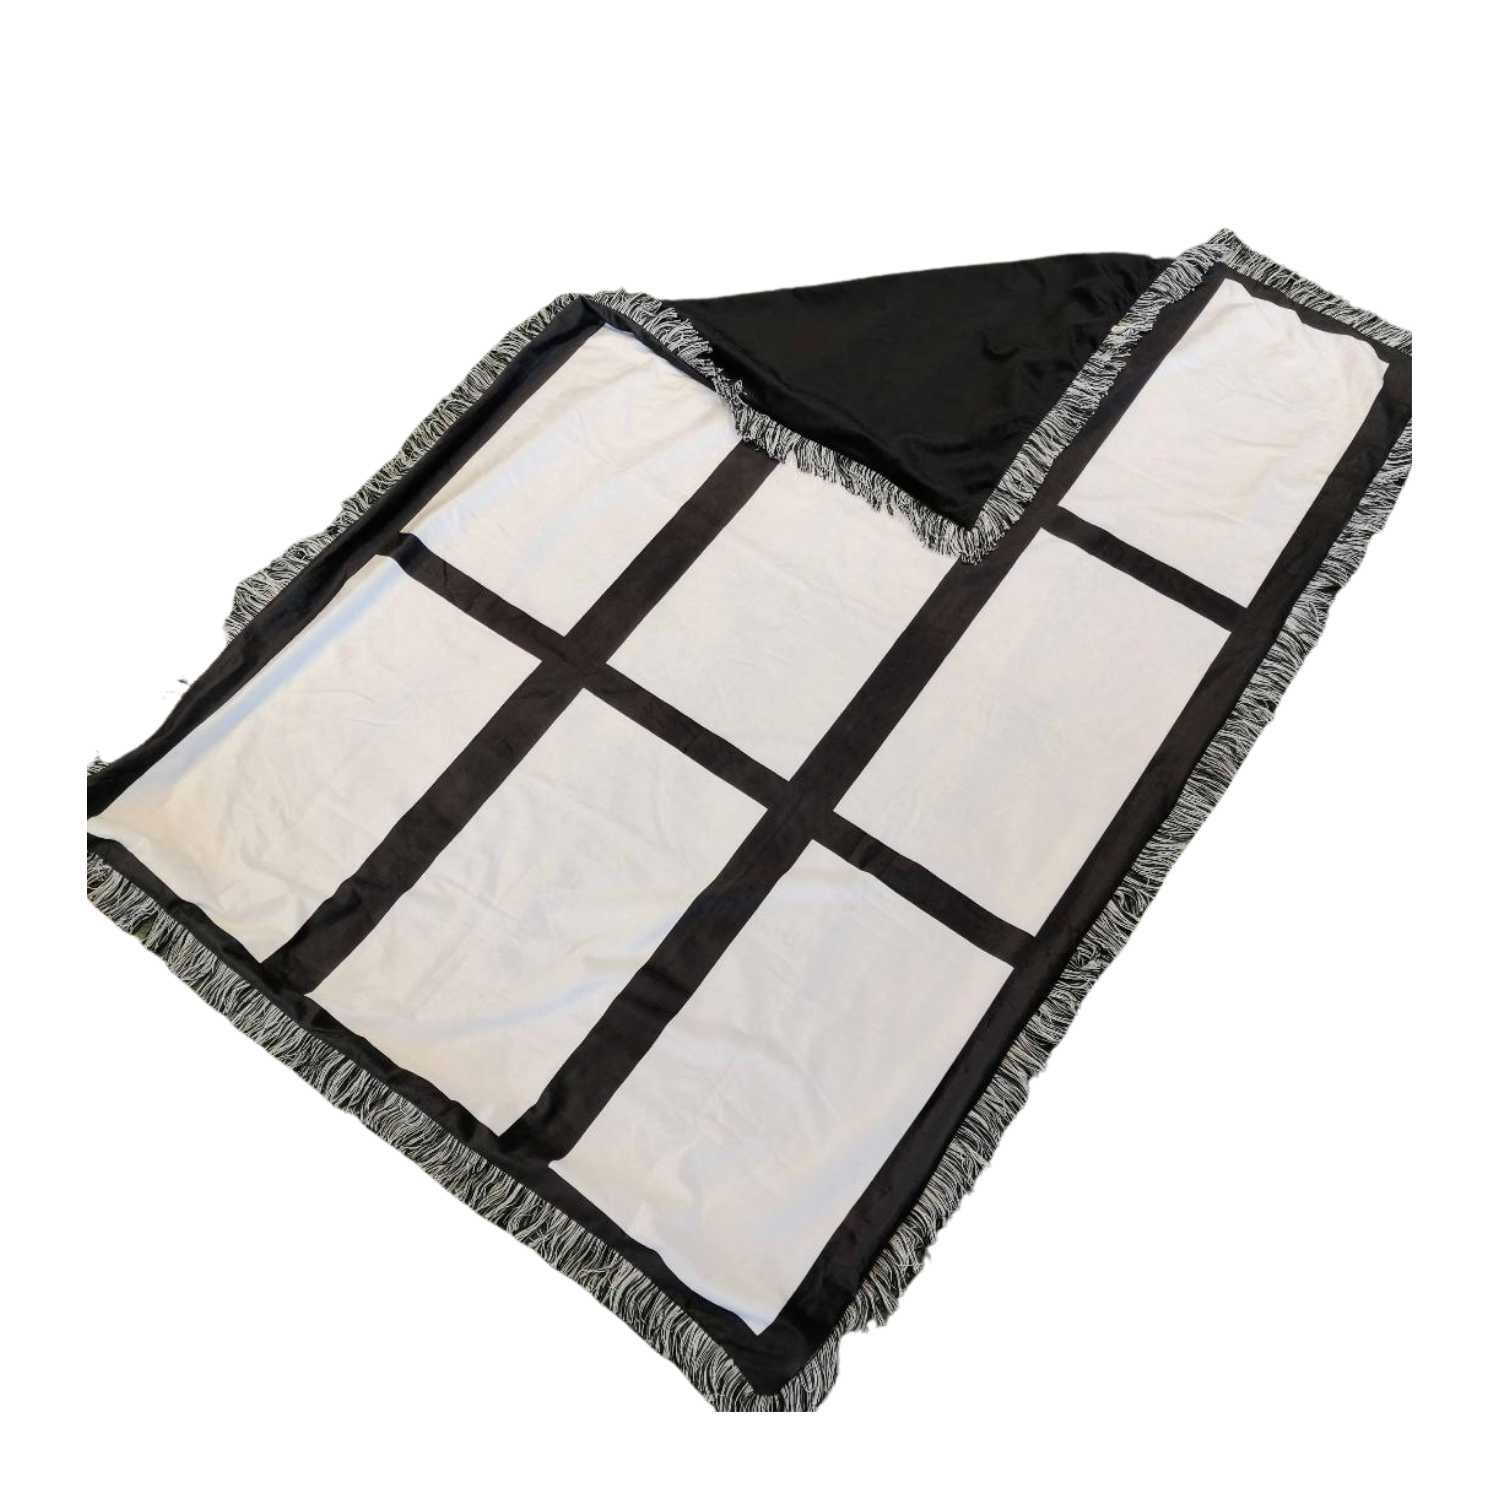 9 Panel Sublimation Blankets (Blank)